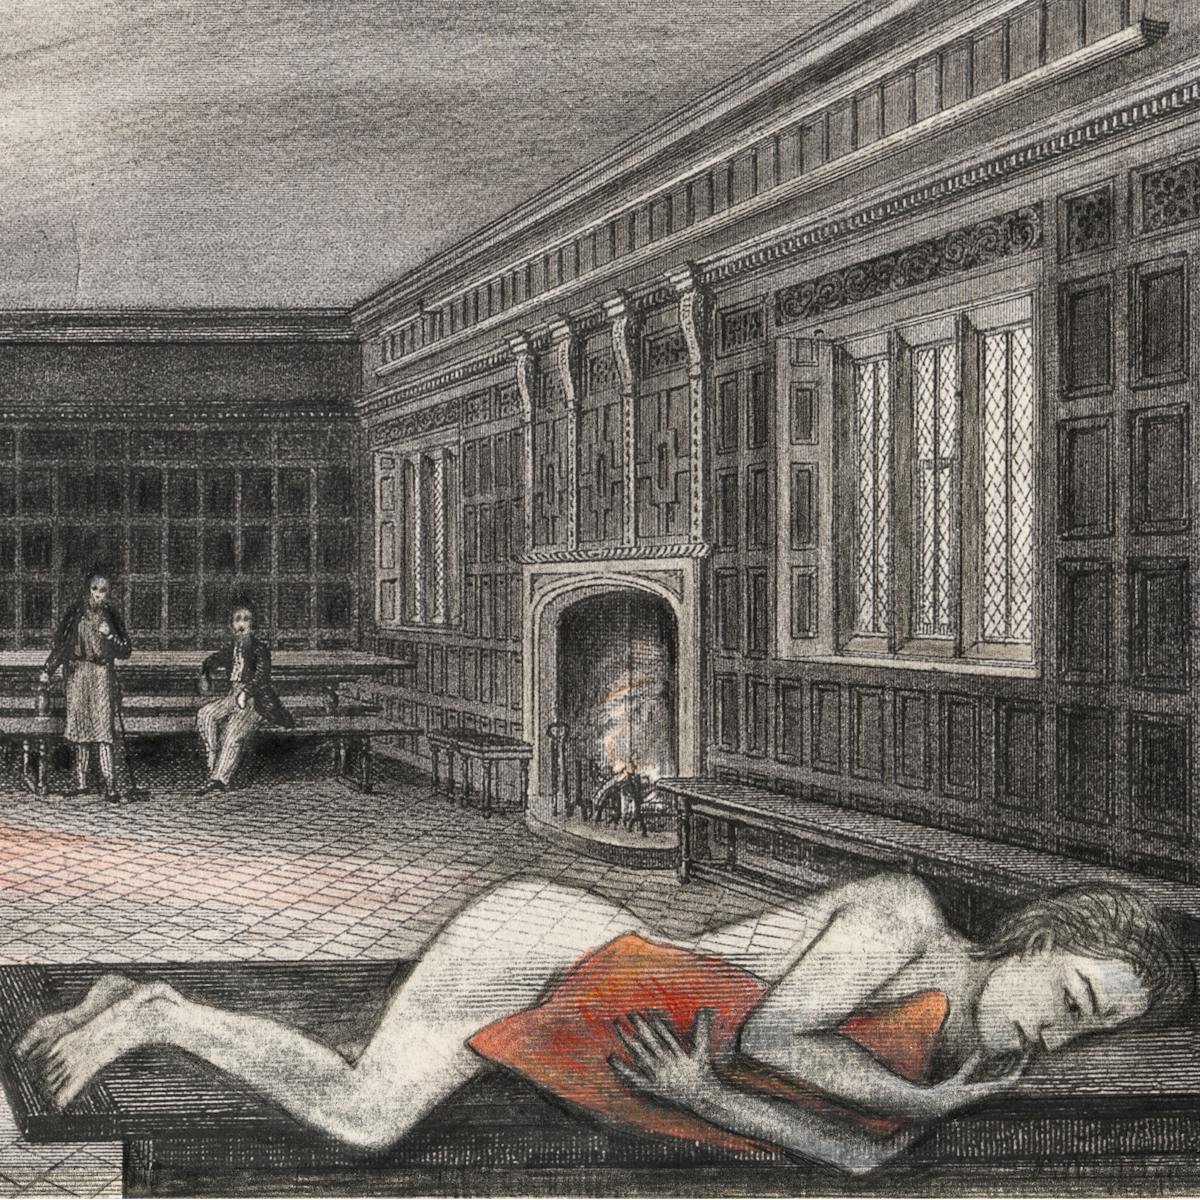 Pencil artwork drawn over an engraving depicting a wooden panelled room with two men in the distance looking towards an unclothed woman lying on her side on a table, clutching a pillow to her front. The whole scene is black and white apart from the pillow and the rays of light streaming in through a window which are tinted red.